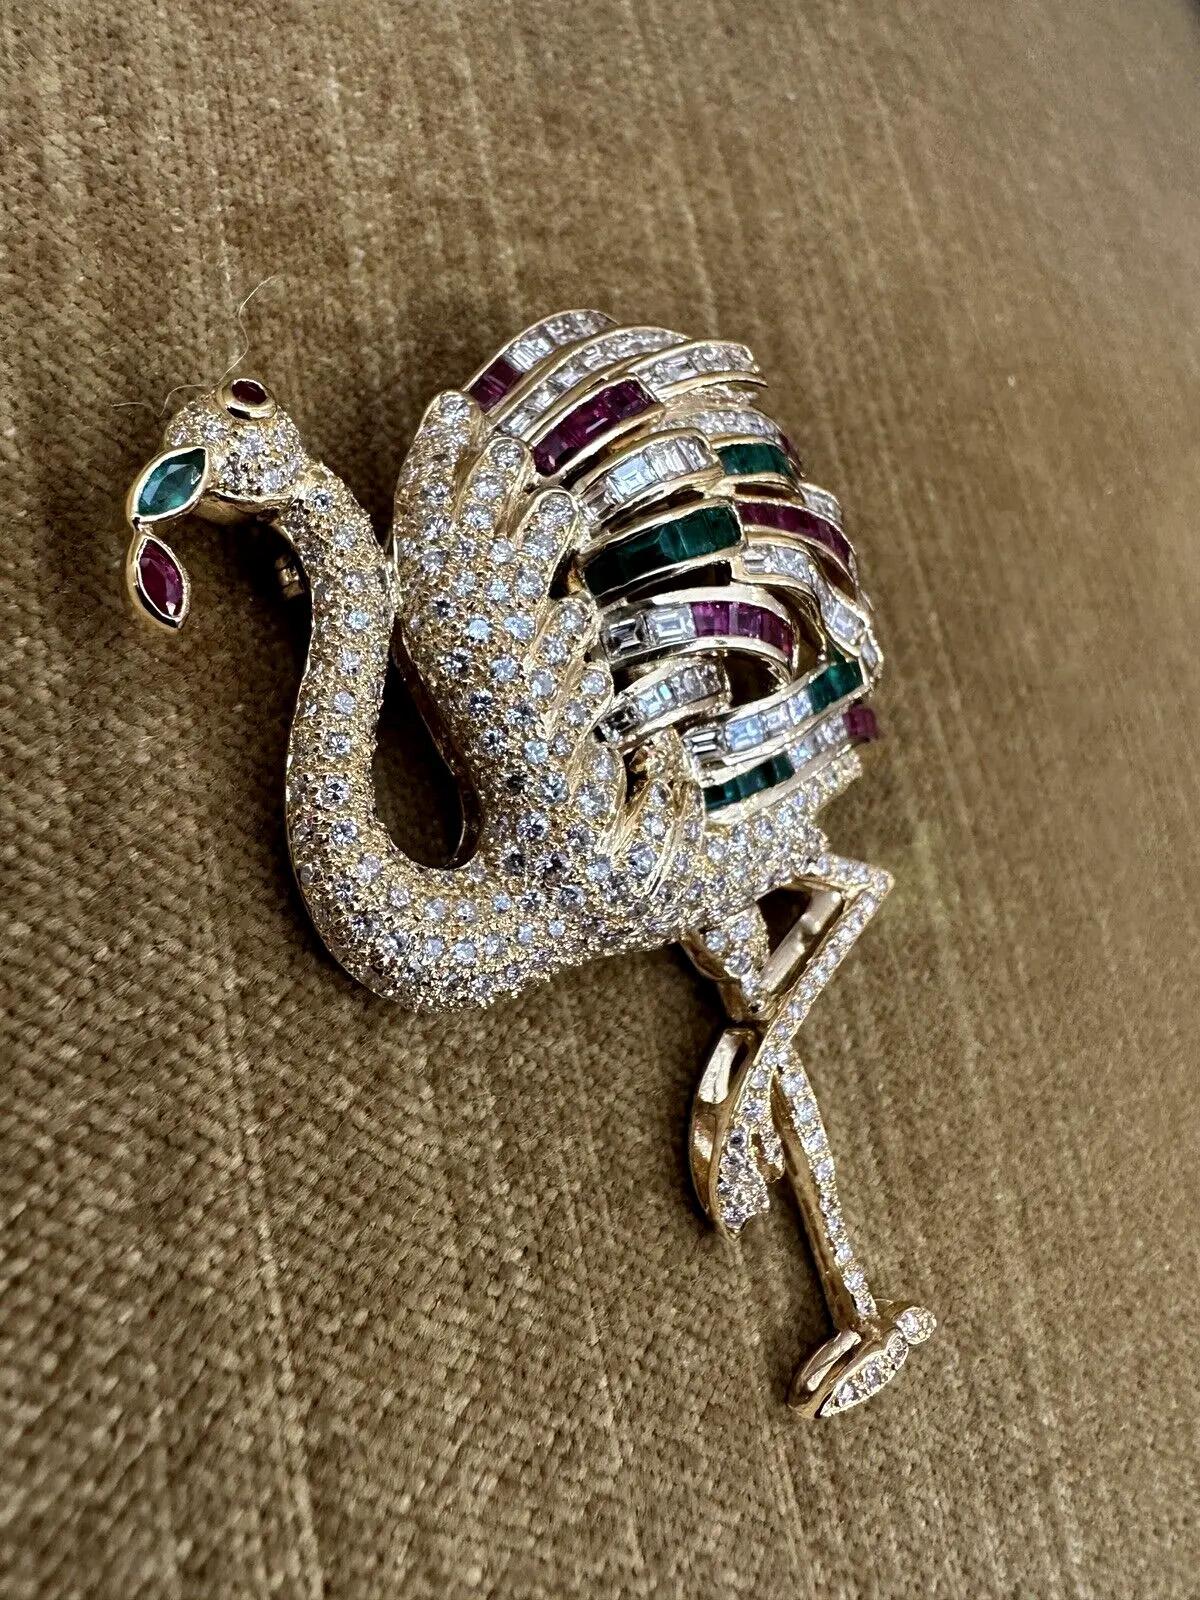 Large Diamond Flamingo Brooch with Rubies & Emeralds in 18k Yellow Gold In Excellent Condition For Sale In La Jolla, CA